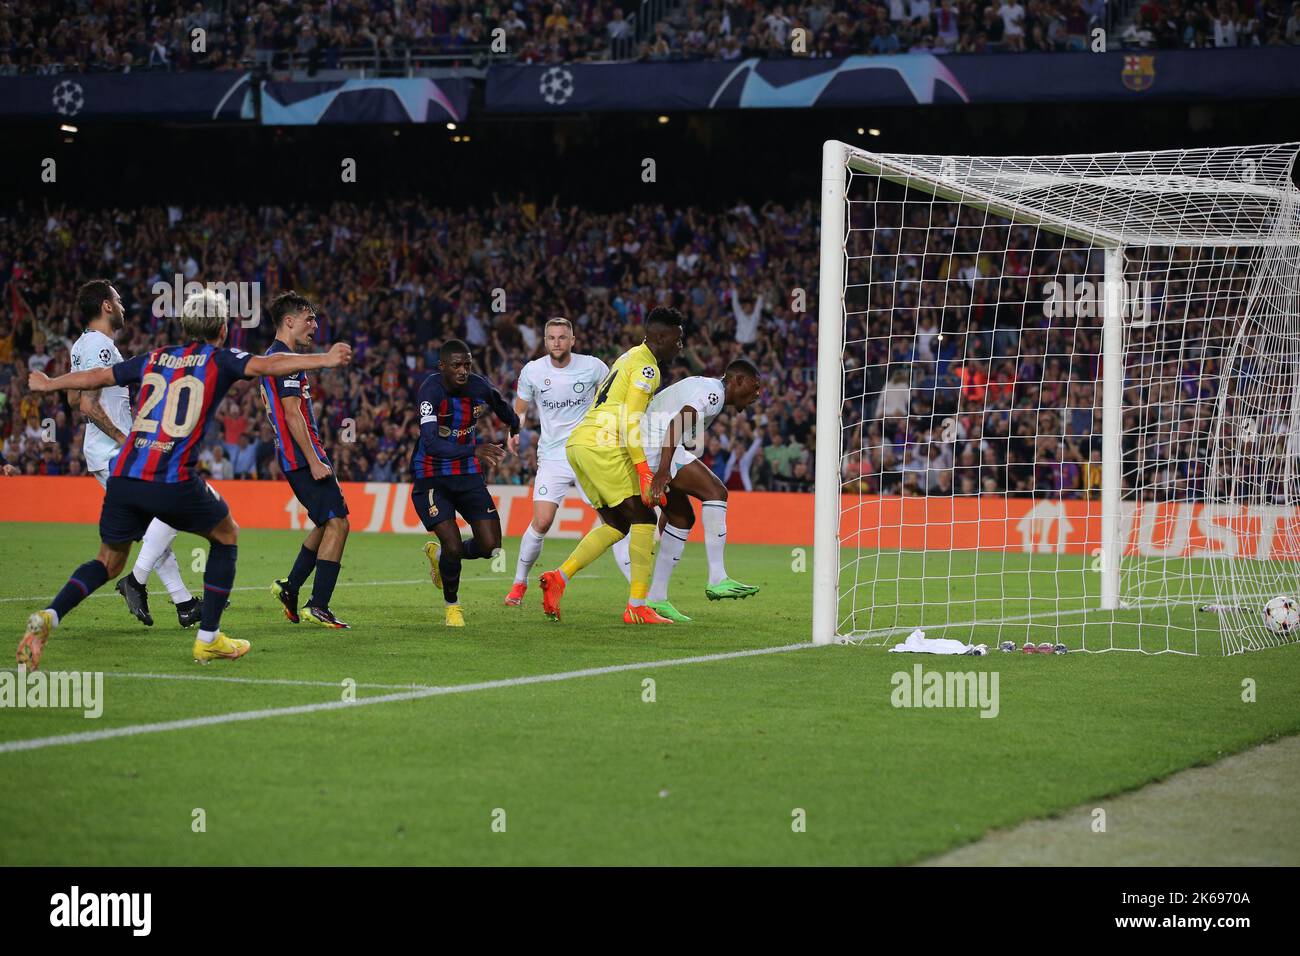 Barcelona, Spain. 12th Oct, 2022. Ousmane Dembele of FC Barcelona scores to give the side a 1-0 lead during the UEFA Champions League match at Camp Nou, Barcelona. Picture credit should read: Jonathan Moscrop/Sportimage Credit: Sportimage/Alamy Live News Stock Photo